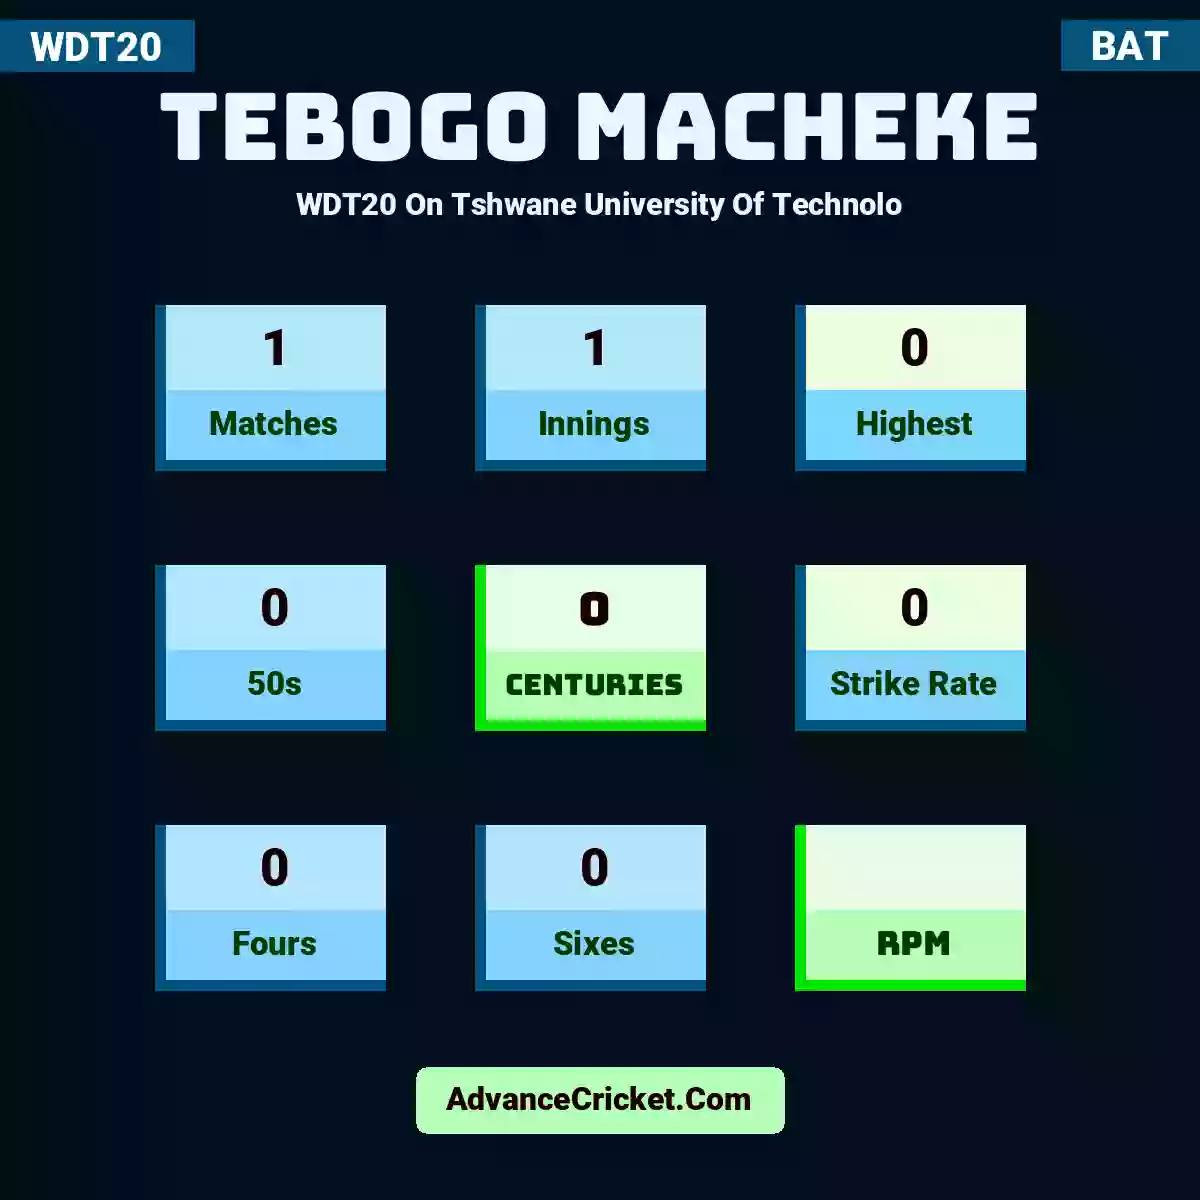 Tebogo Macheke WDT20  On Tshwane University Of Technolo, Tebogo Macheke played 1 matches, scored 0 runs as highest, 0 half-centuries, and 0 centuries, with a strike rate of 0. T.Macheke hit 0 fours and 0 sixes.